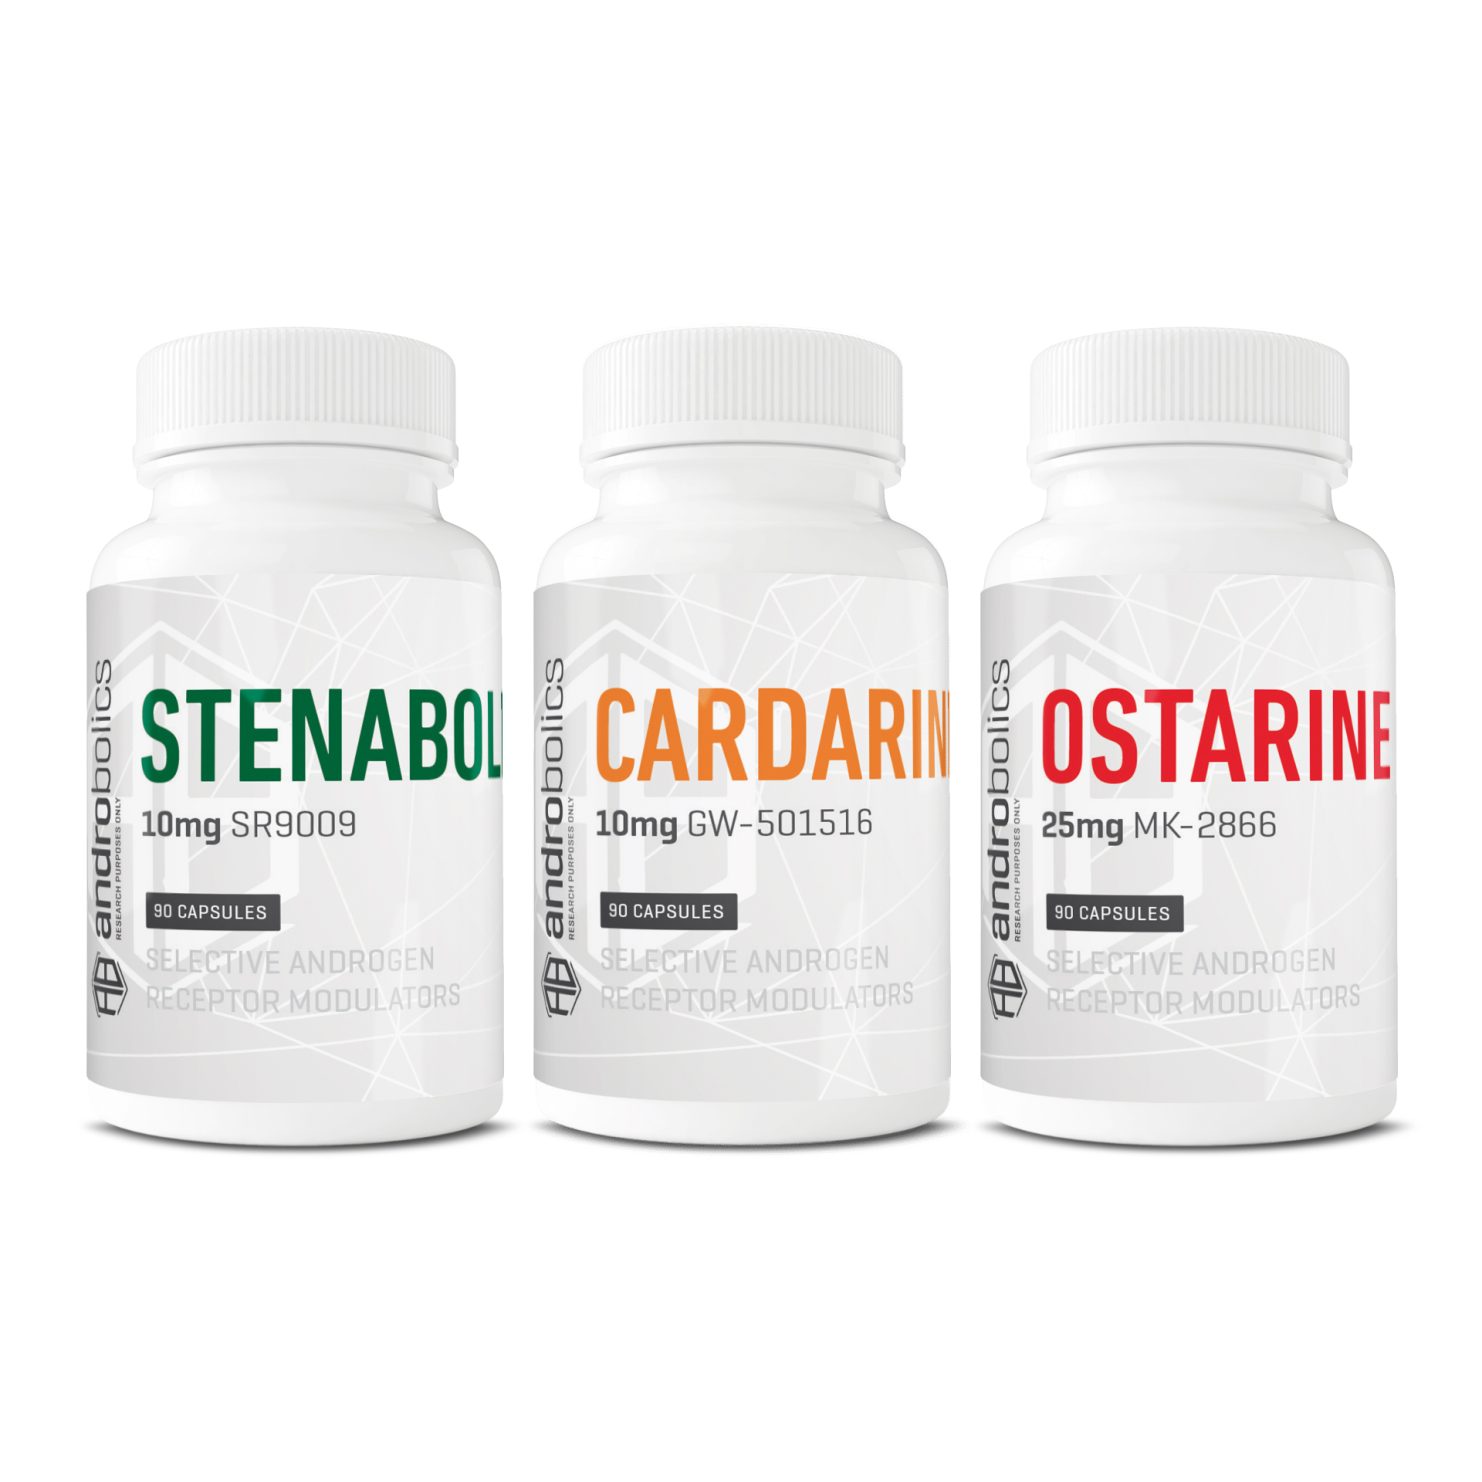 Athlete SARMs Stack with Ostarine, Cardarine, and Stenabolic bottles from Androbolics.